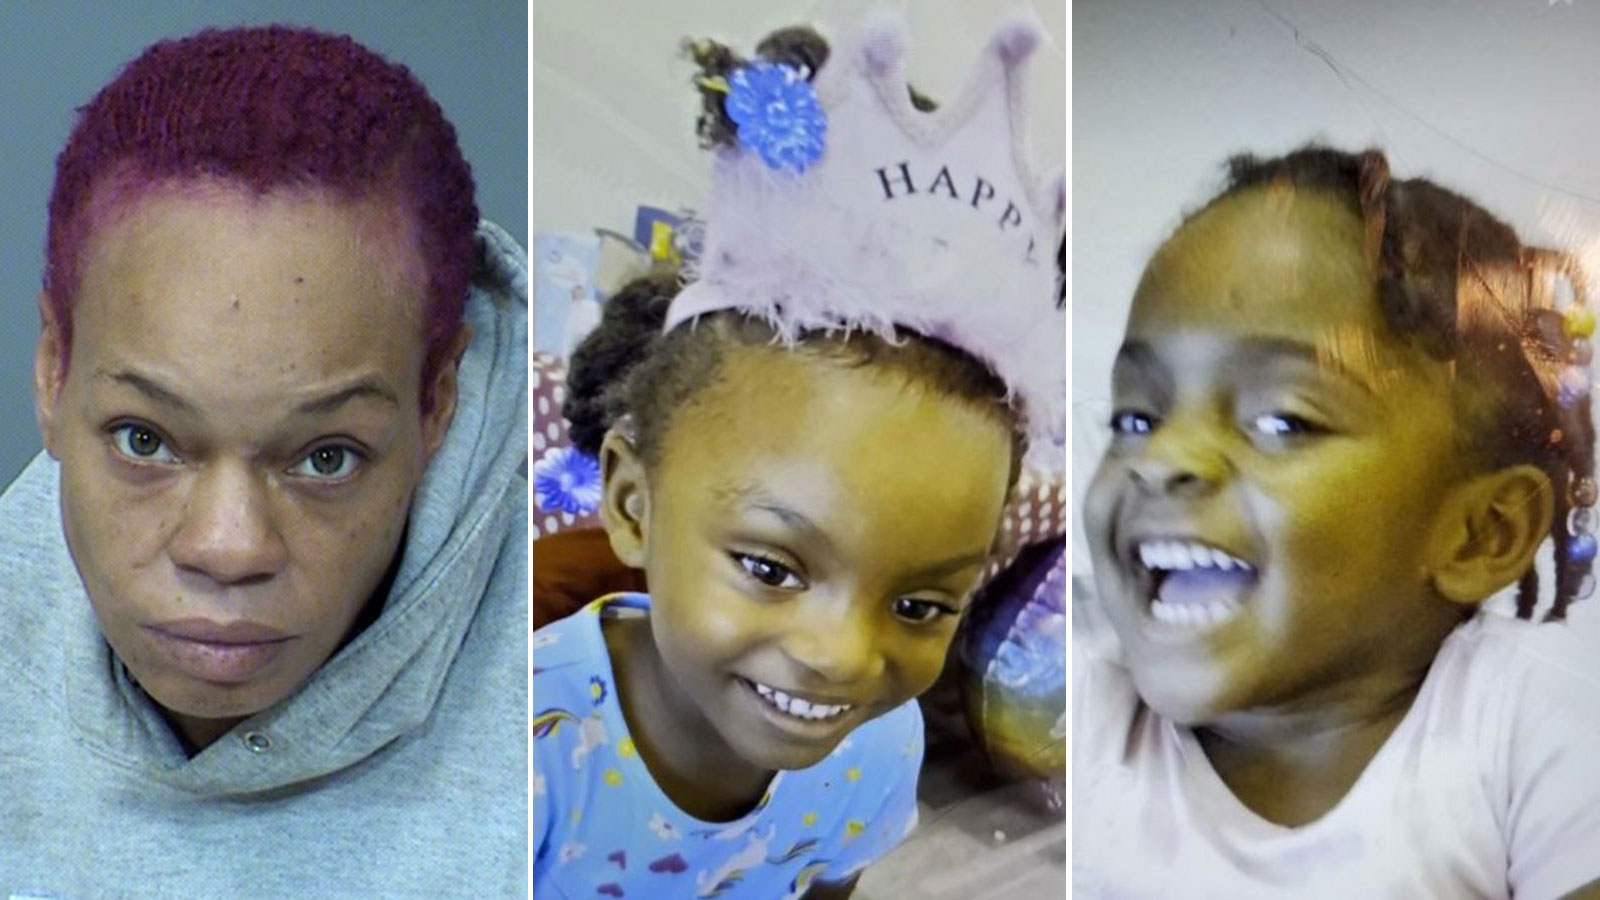 Mother of 2 Phoenix girls reported missing over weekend accused of child abuse